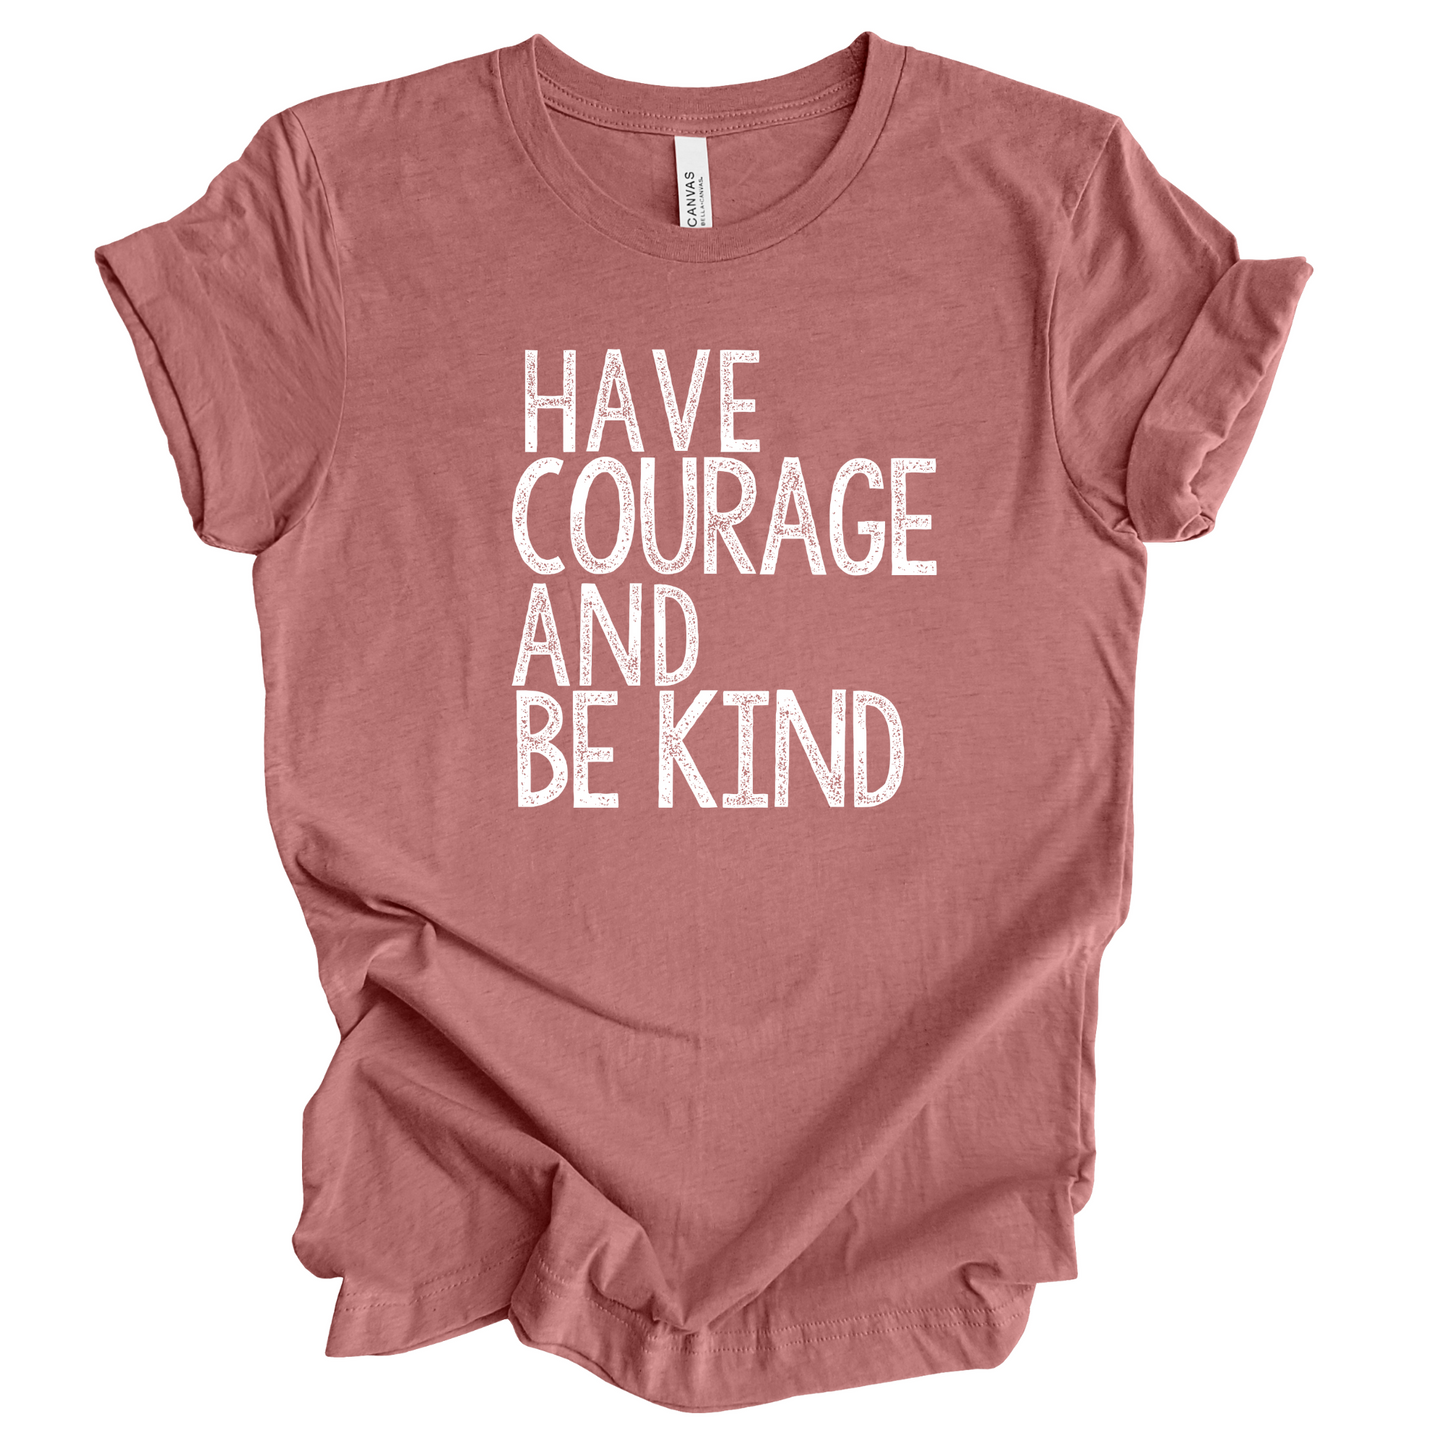 Have Courage and Be Kind T-Shirt